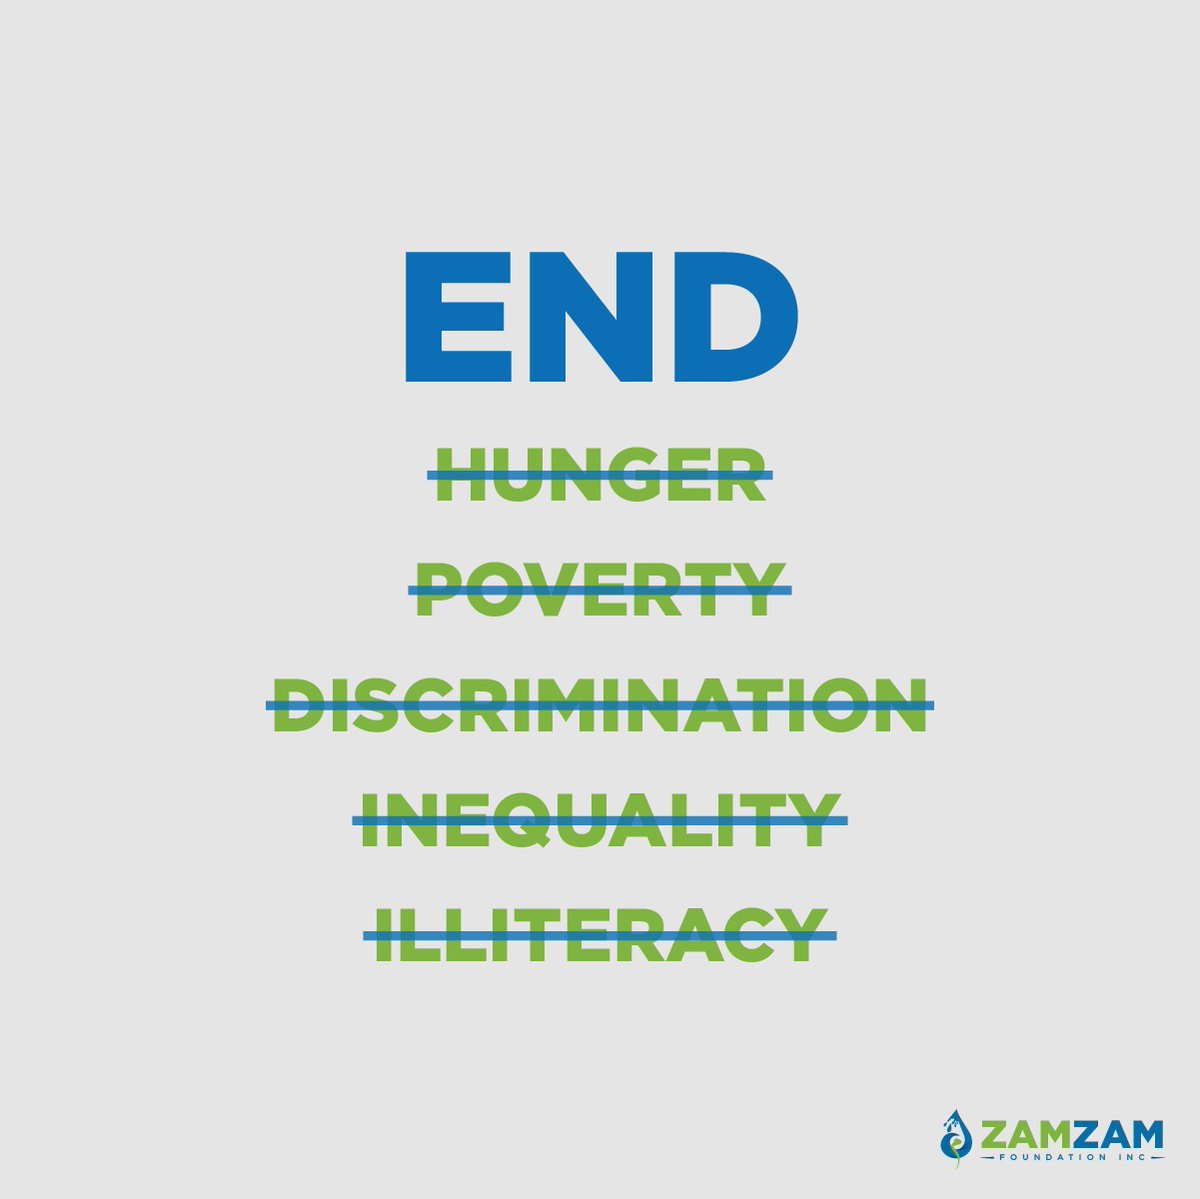 Together, we envision a world where these words are replaced with hope, opportunity, justice, and empowerment.

#EndHunger #EndPoverty #EndDiscrimination #EndInequality #EndIlliteracy #zamzamfoundation